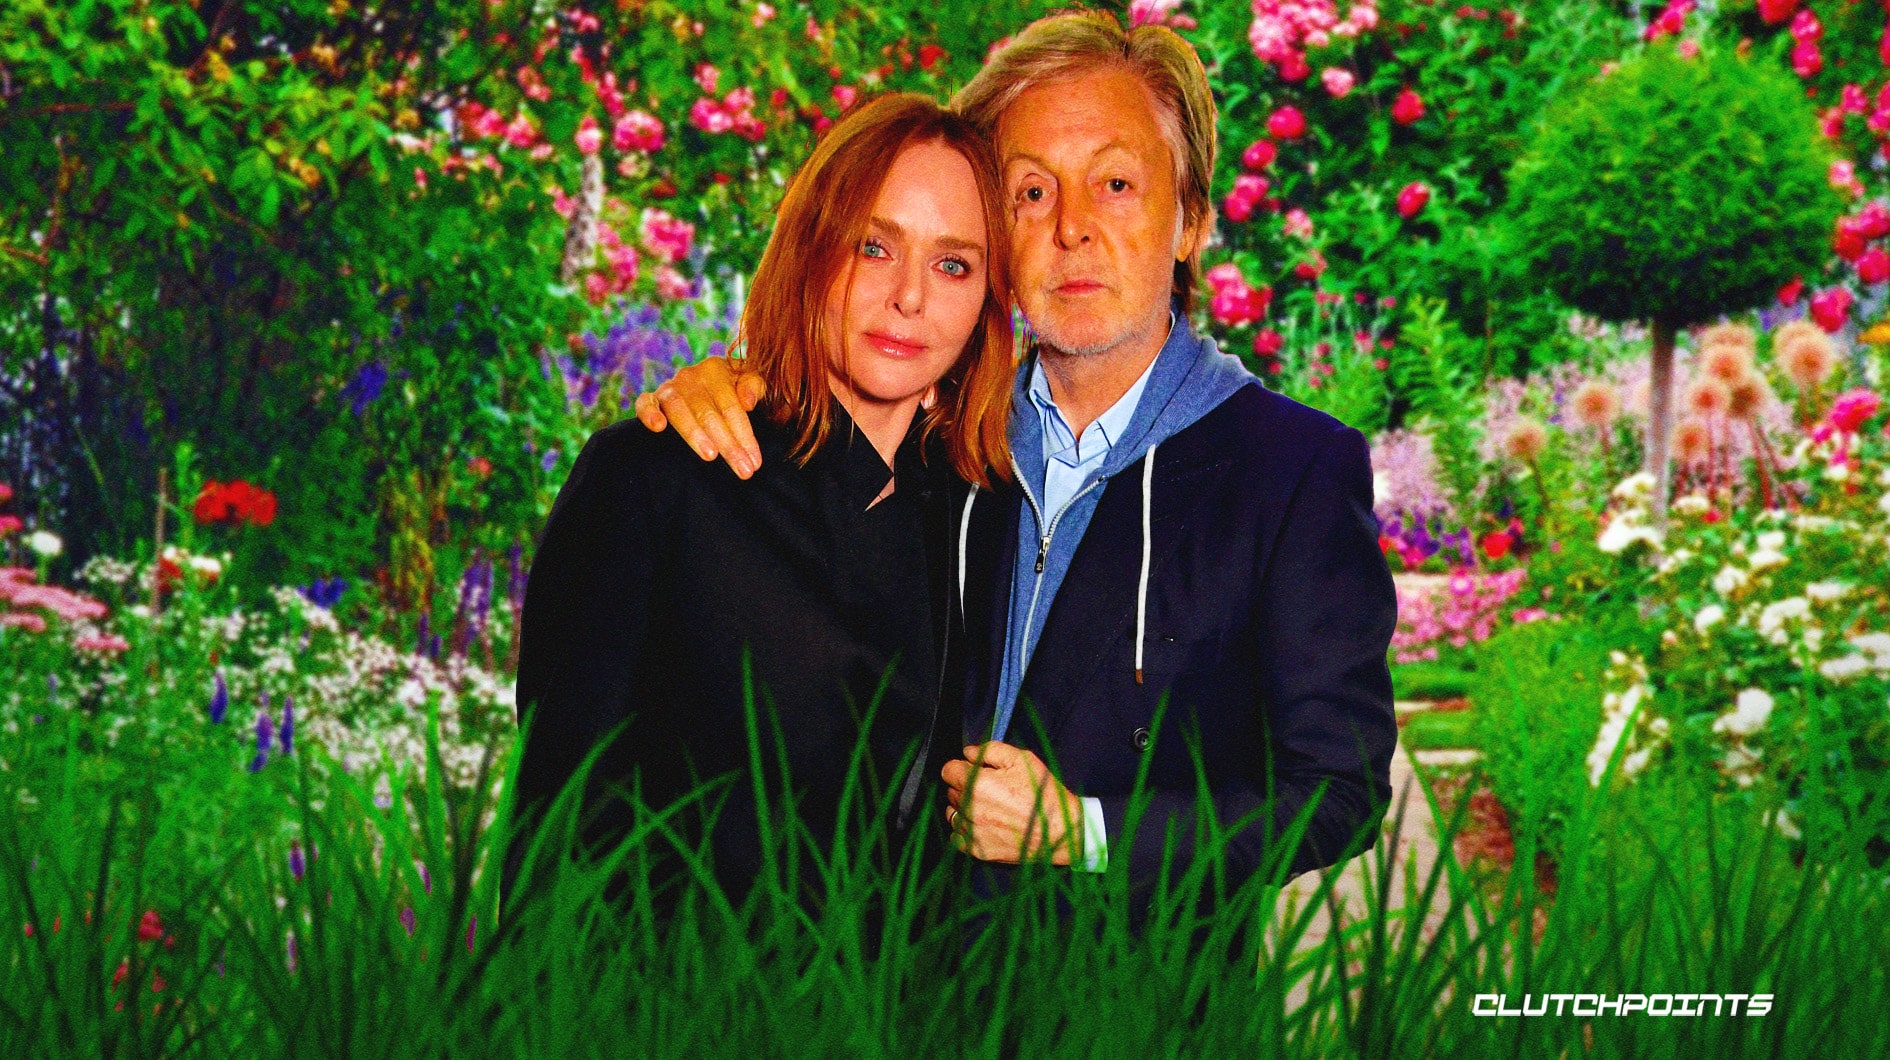 Paul McCartney's daughter Stella pays tribute for Father's Day